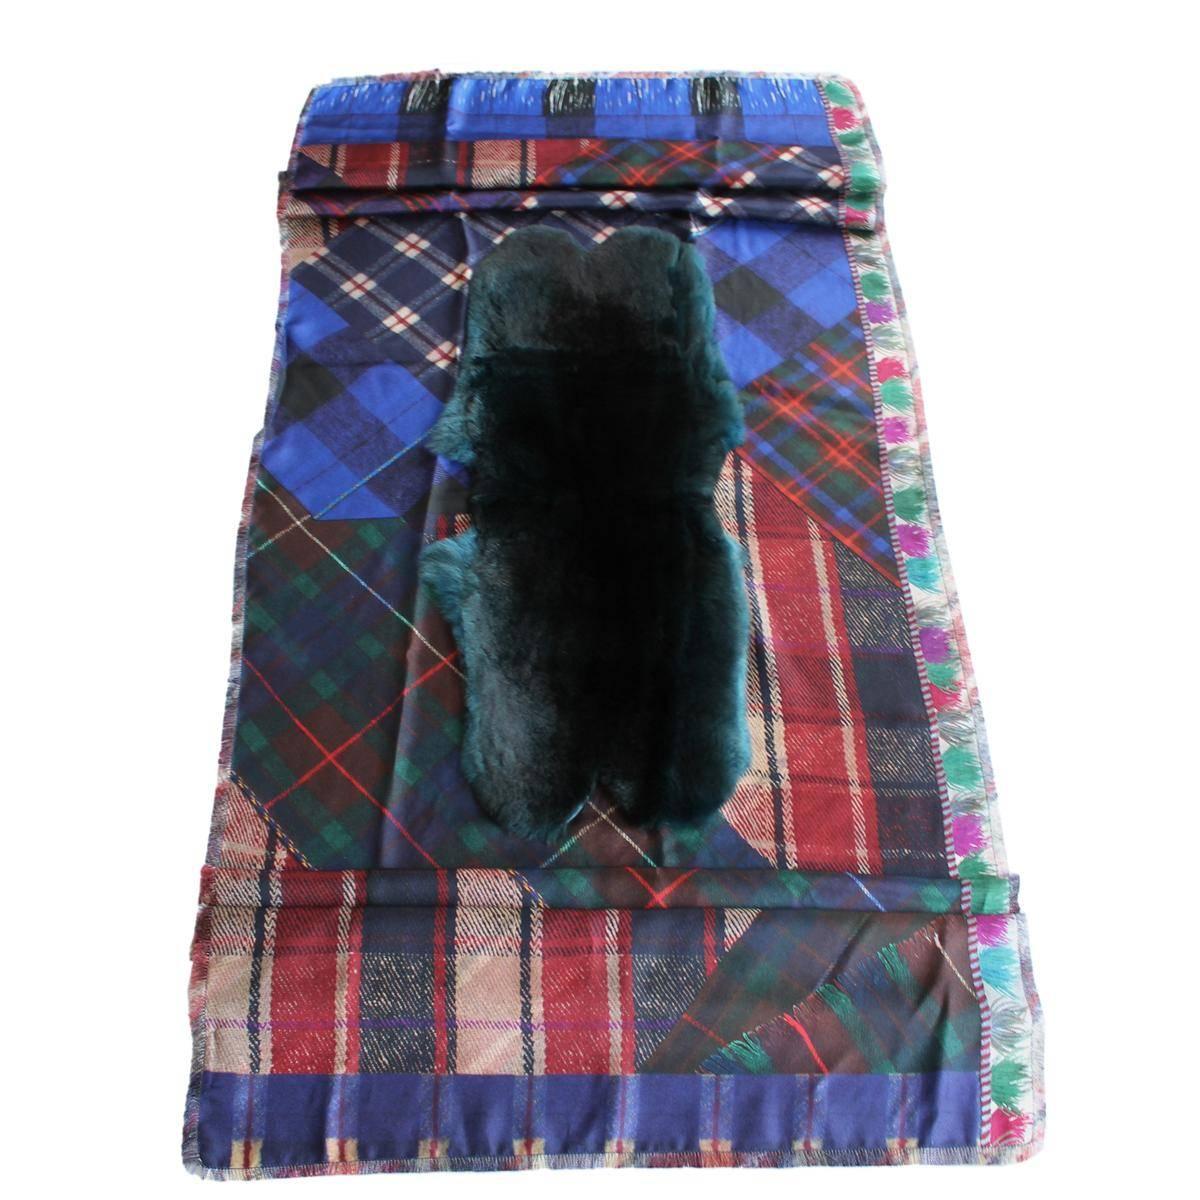 So original and chic silk orylag fur scarf
100% Silk
Multicolored tartan pattern
Central real Orylag fur
Ottanium color fur
Cm 198 x 66 (78 x 25.9 inches)
Worldwide express shipping included in the price !